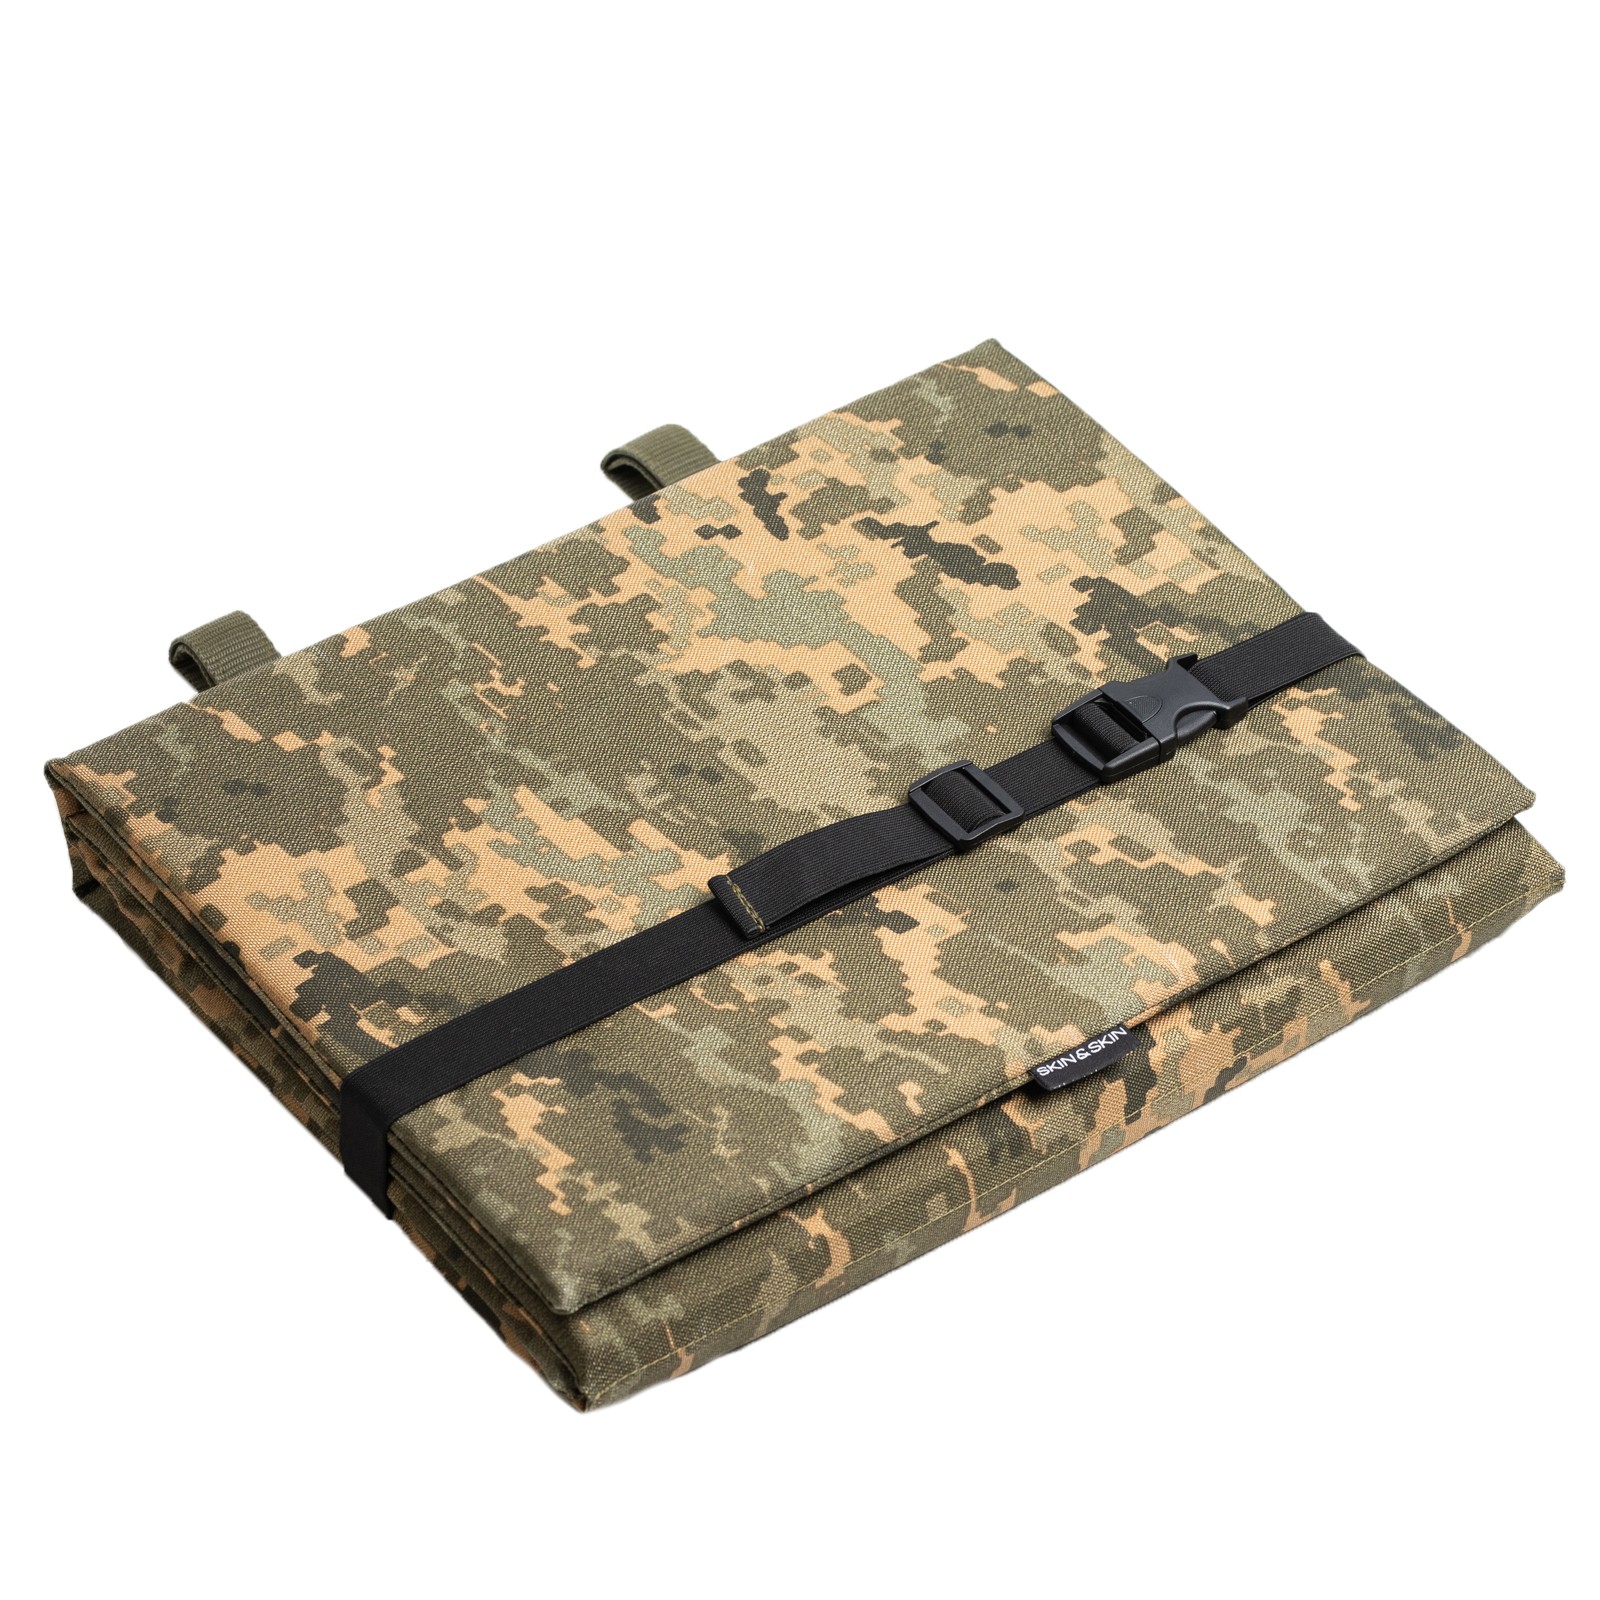 Pixel groundsheet pad, molle system seating pad, tactical seat pad